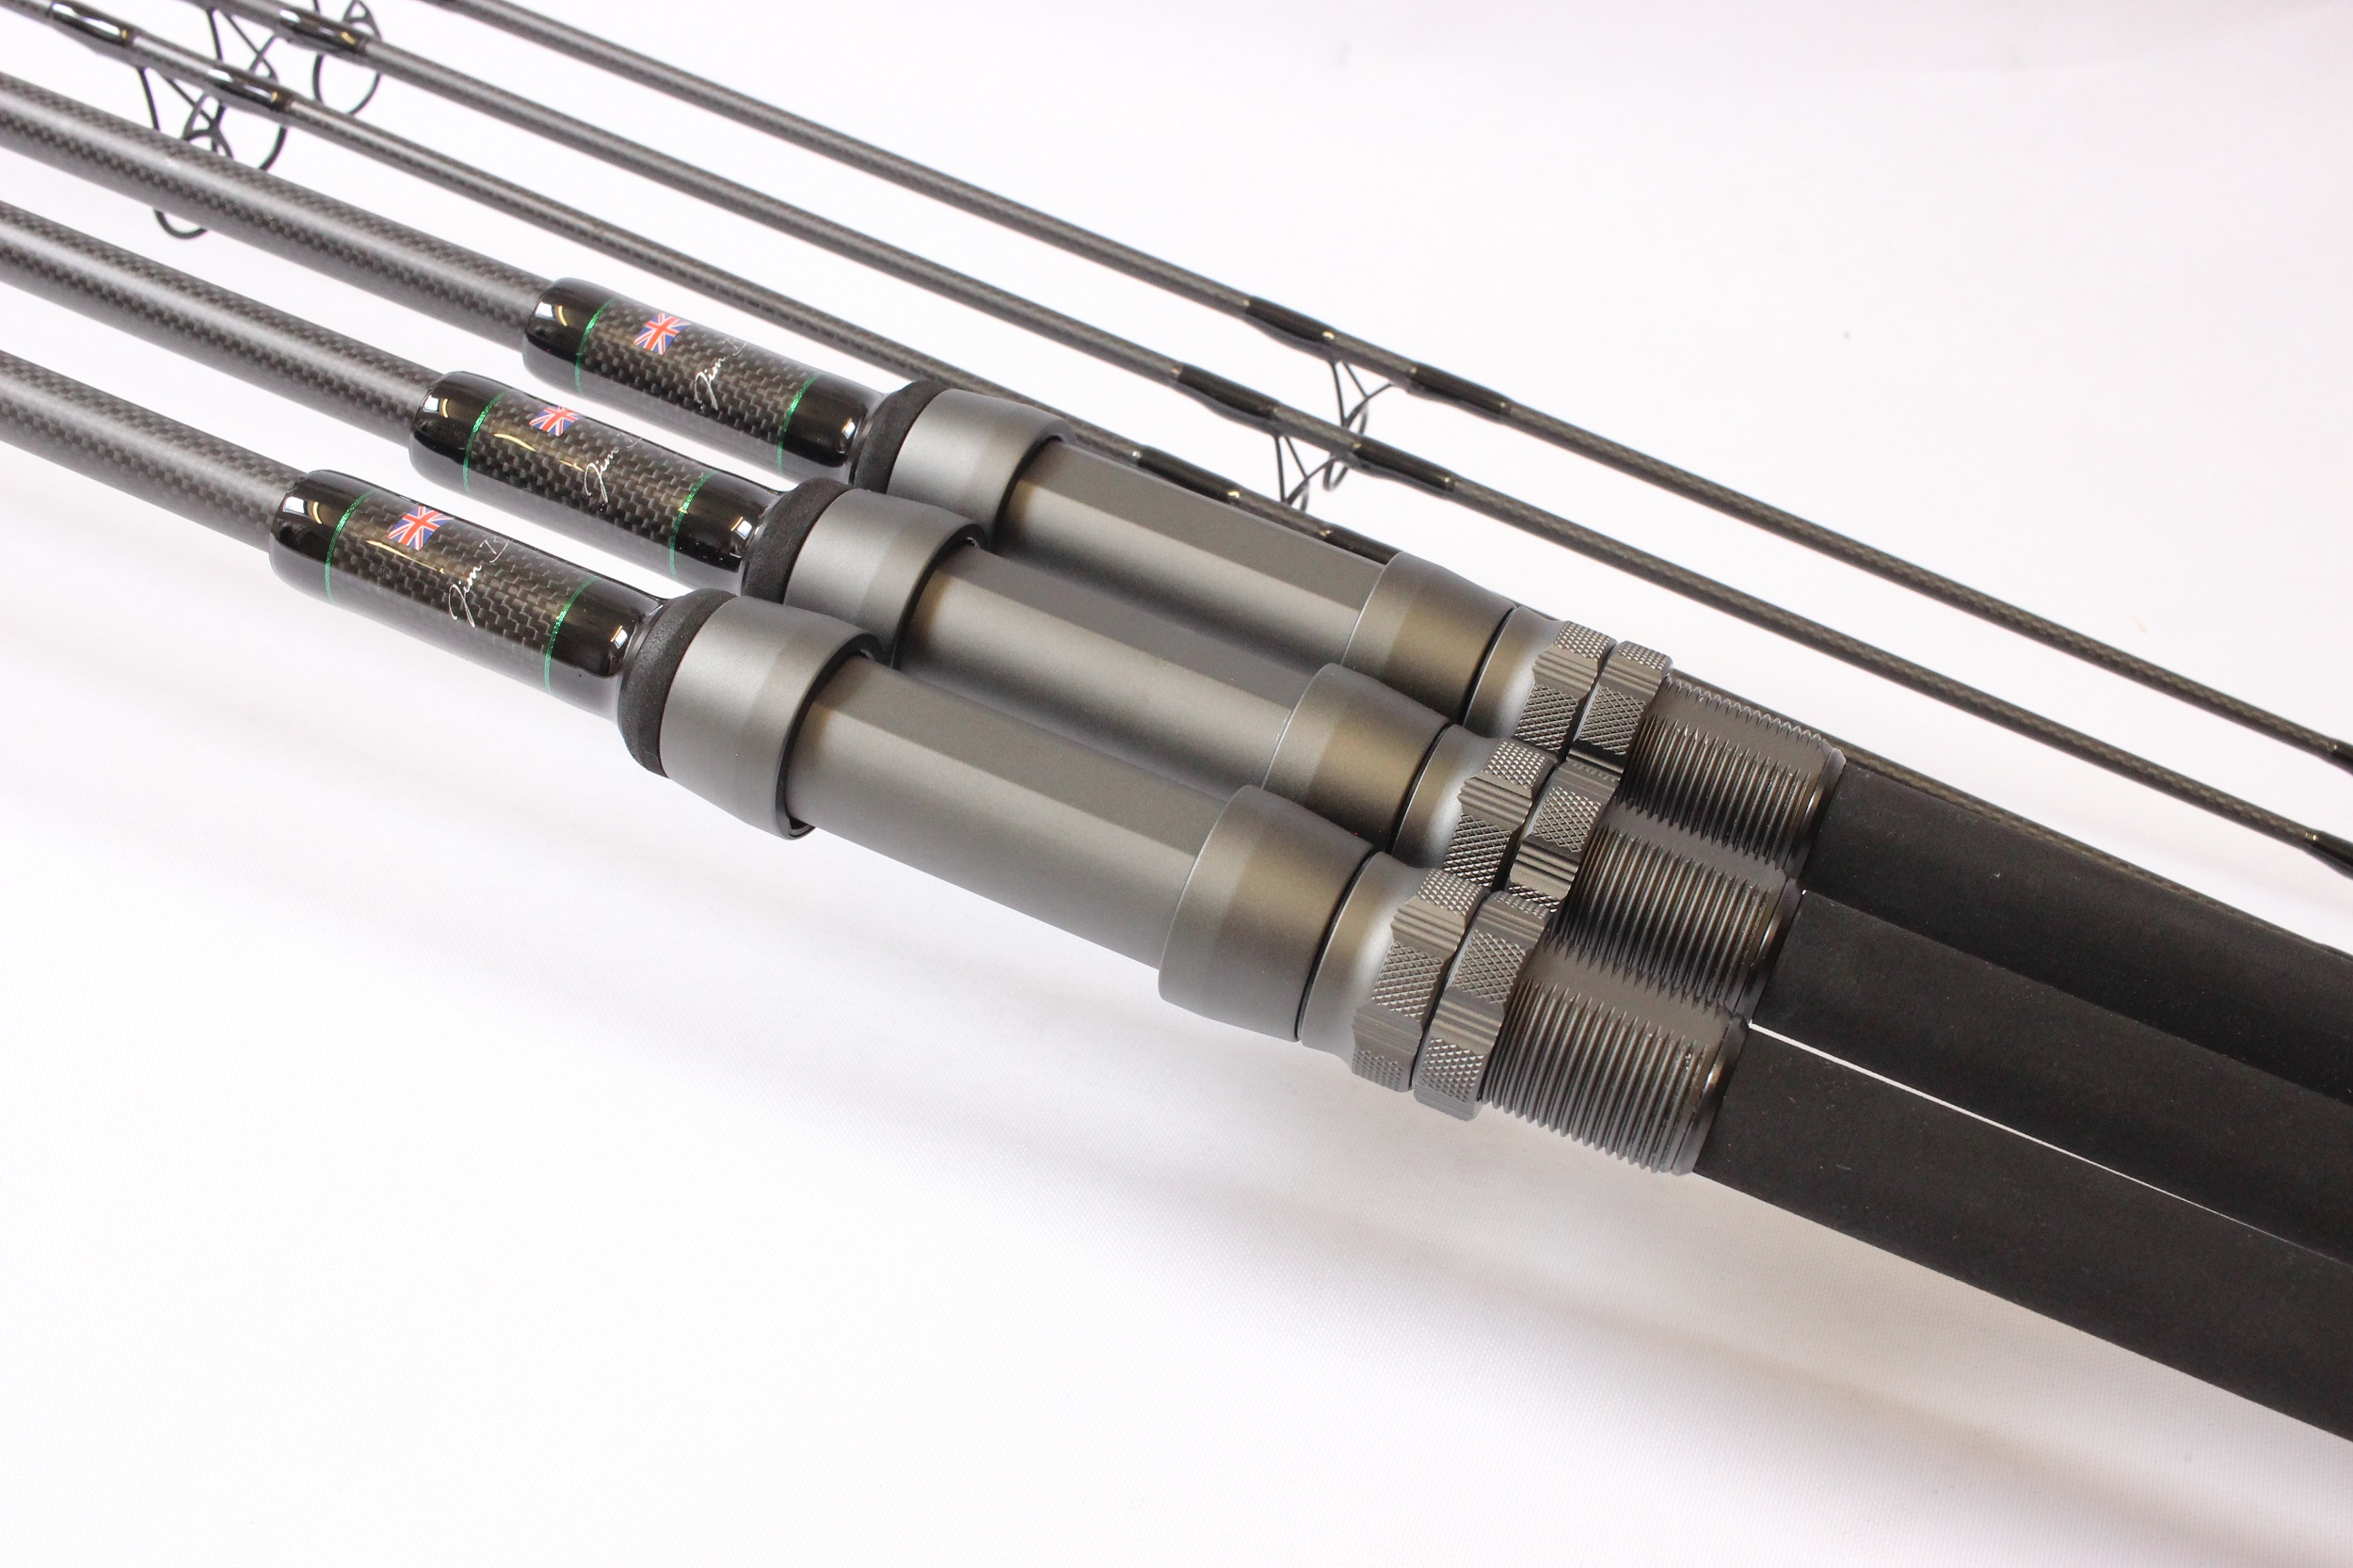 Spectra Compact Rods